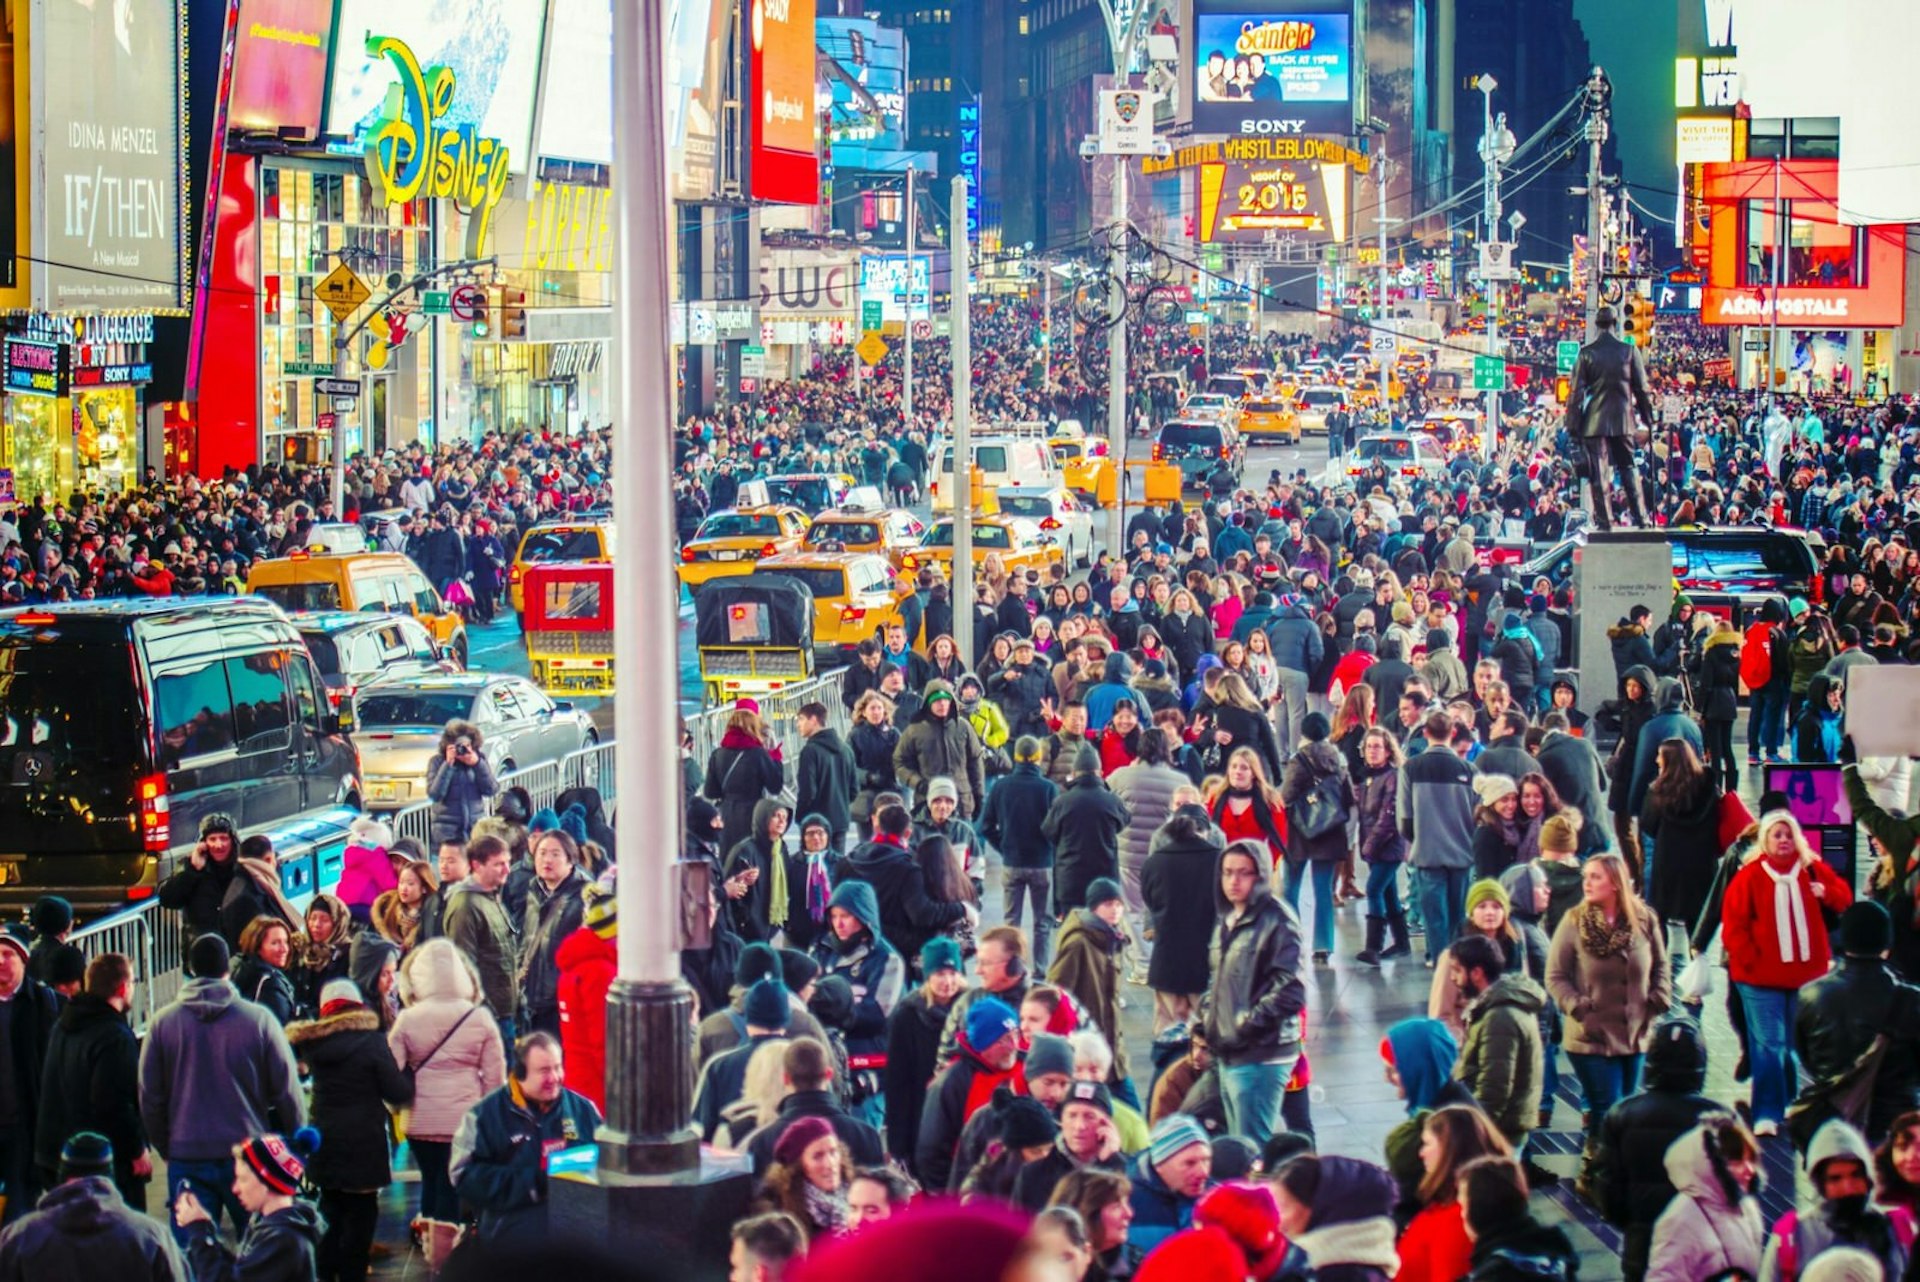 Mass, colourful crowds flood the streets of central New York © Alexander Image / Shutterstock